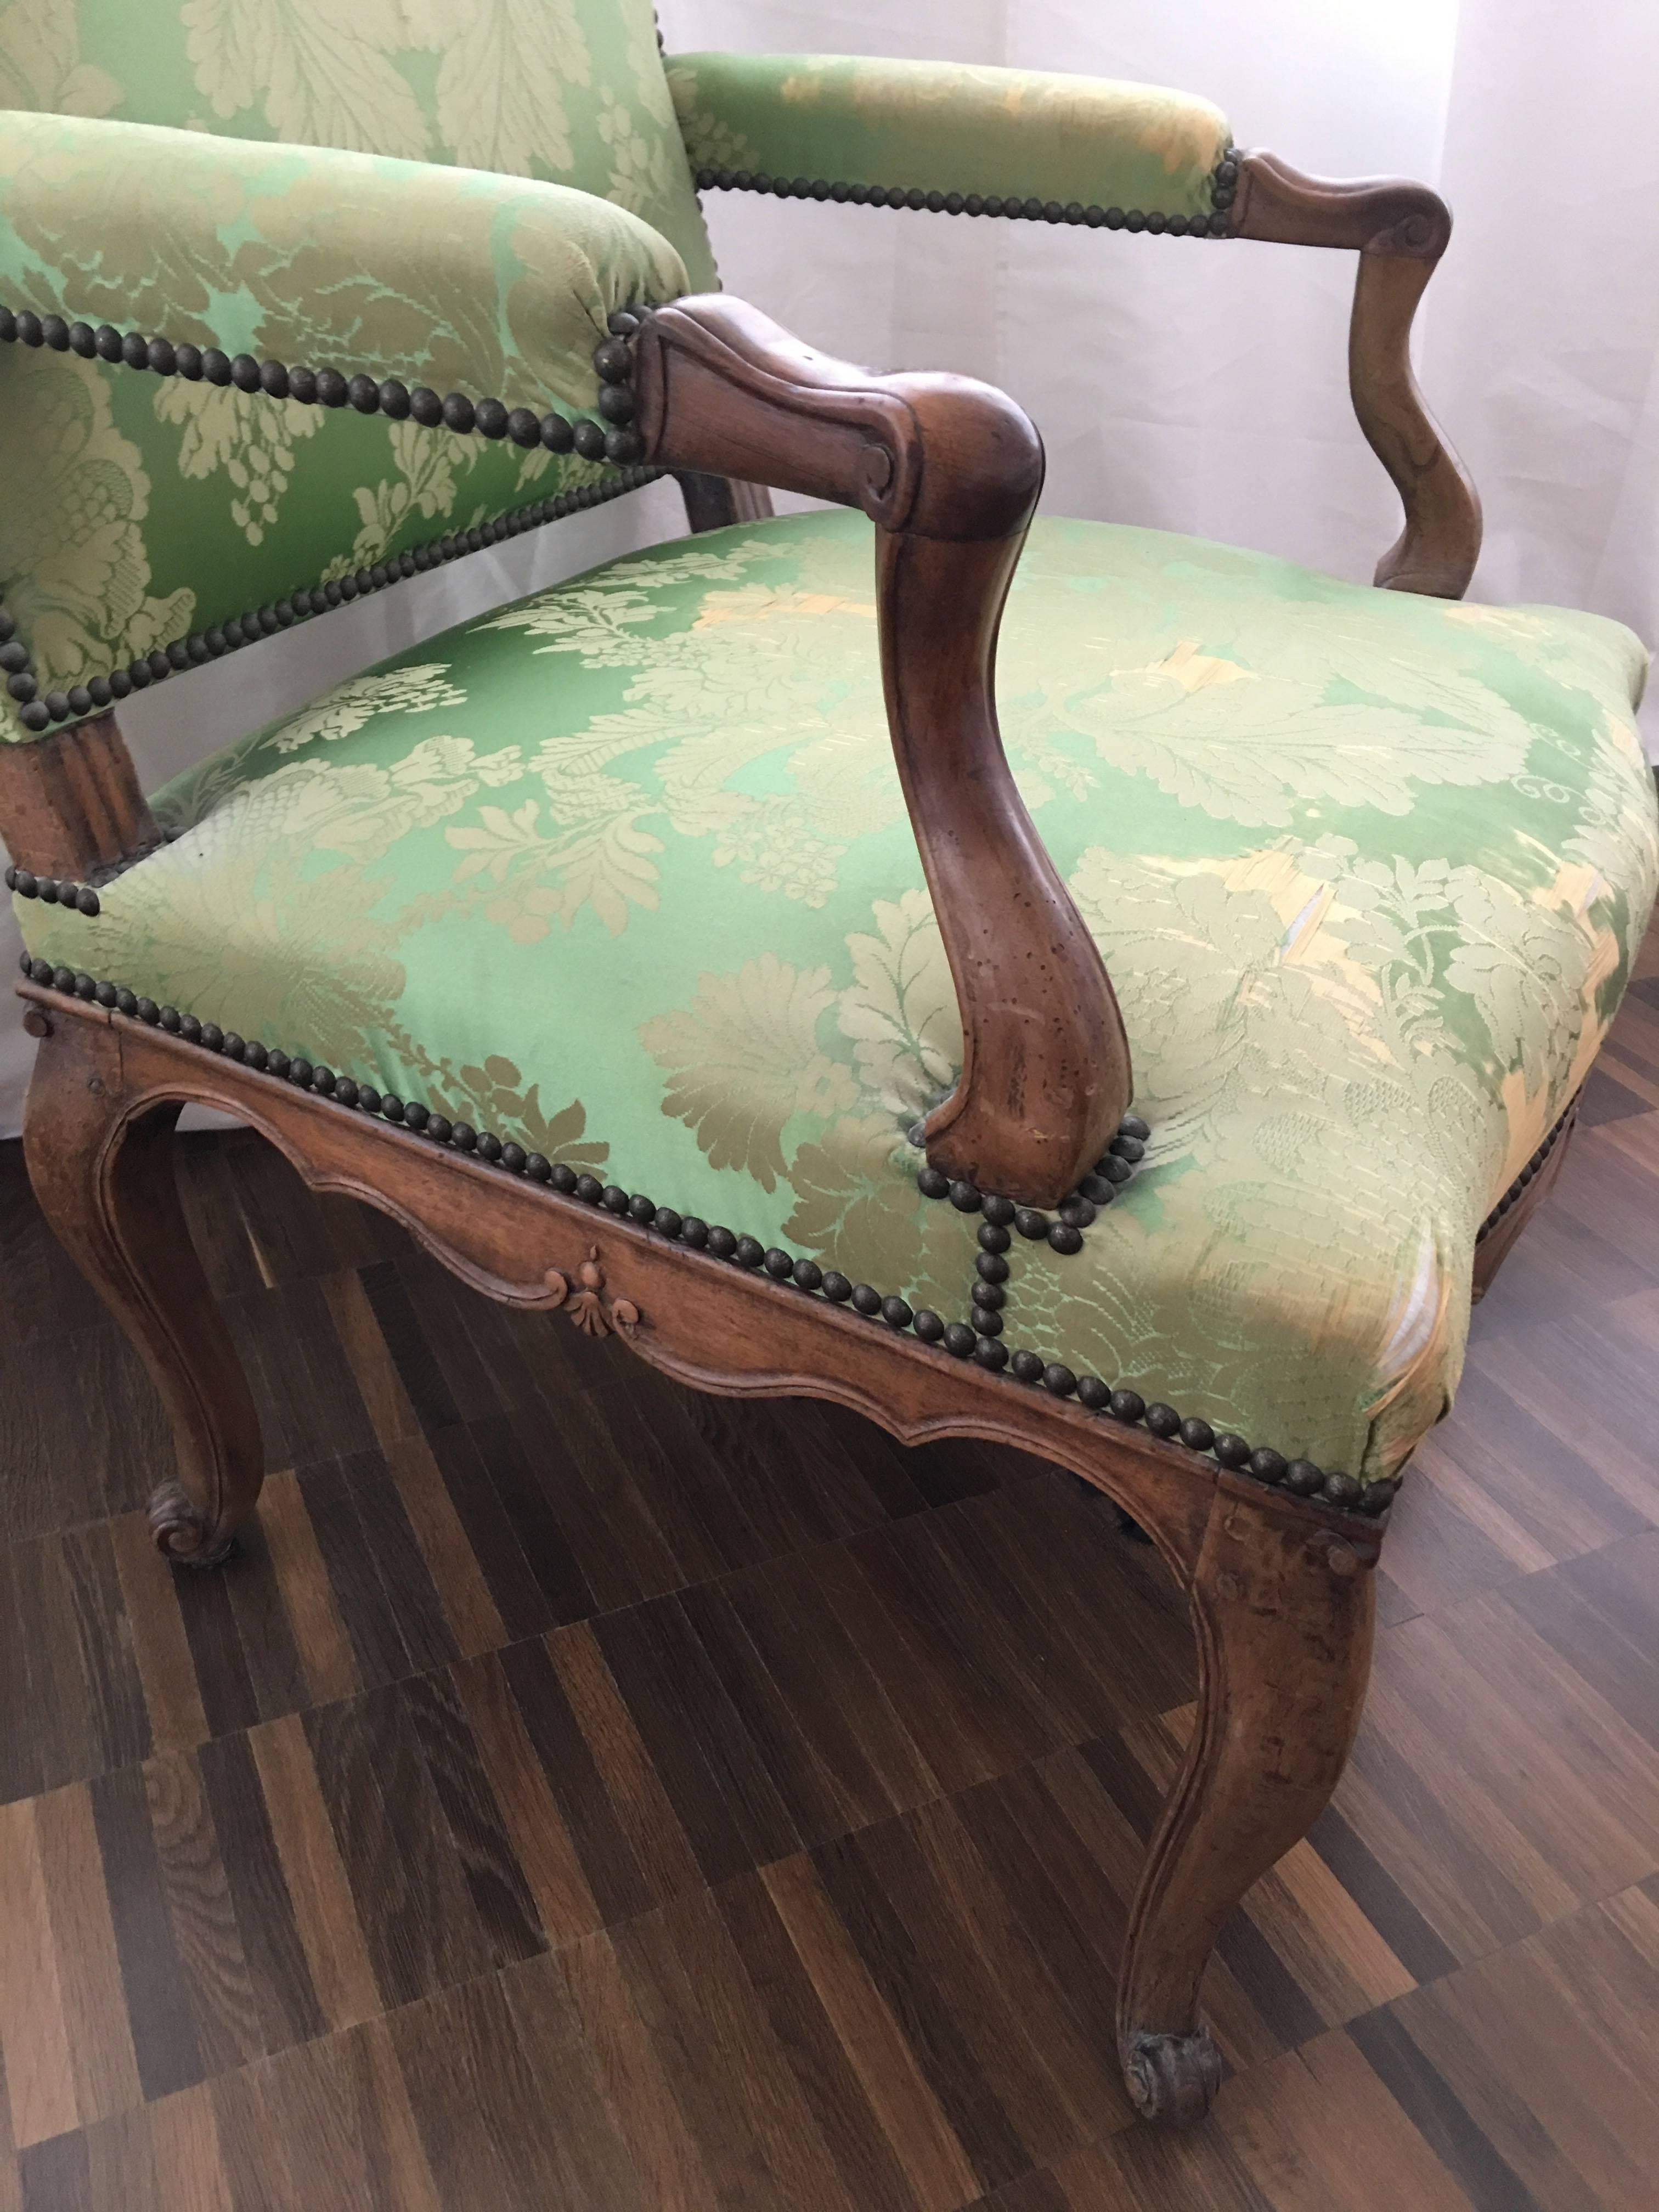 A single 19th century French Louis XV Regence Fauteuil a la Reine/armchair.

Made of a walnut frame, decorative nails head and escargots feet. 

A comfortable tall back armchair.